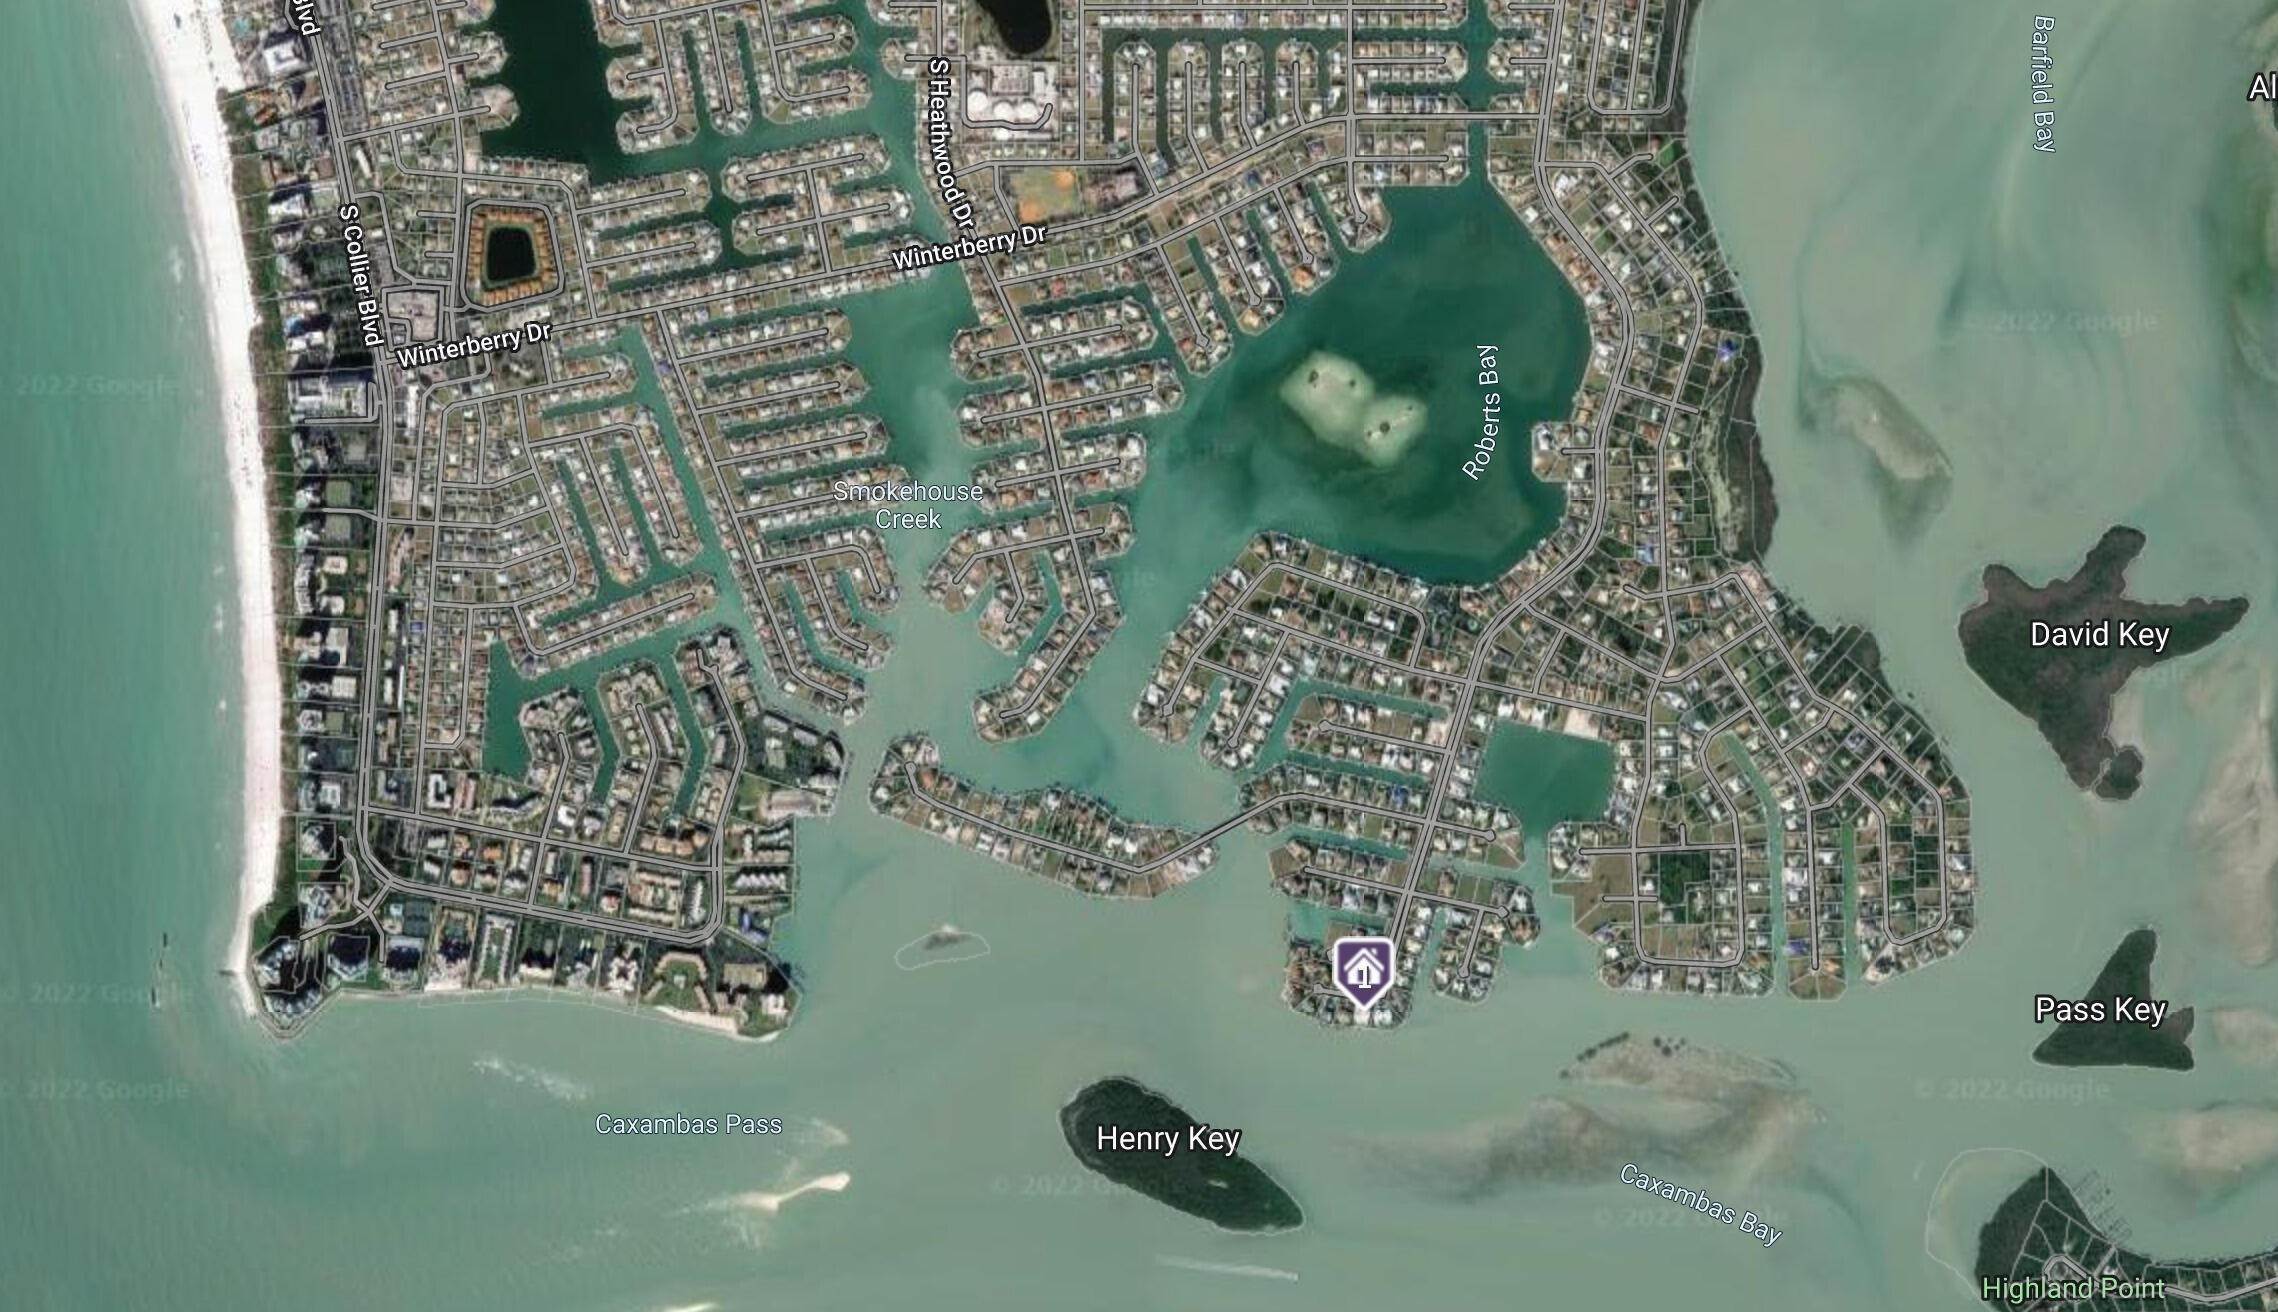 28. Single Family for Sale at Marco Island, FL 34145